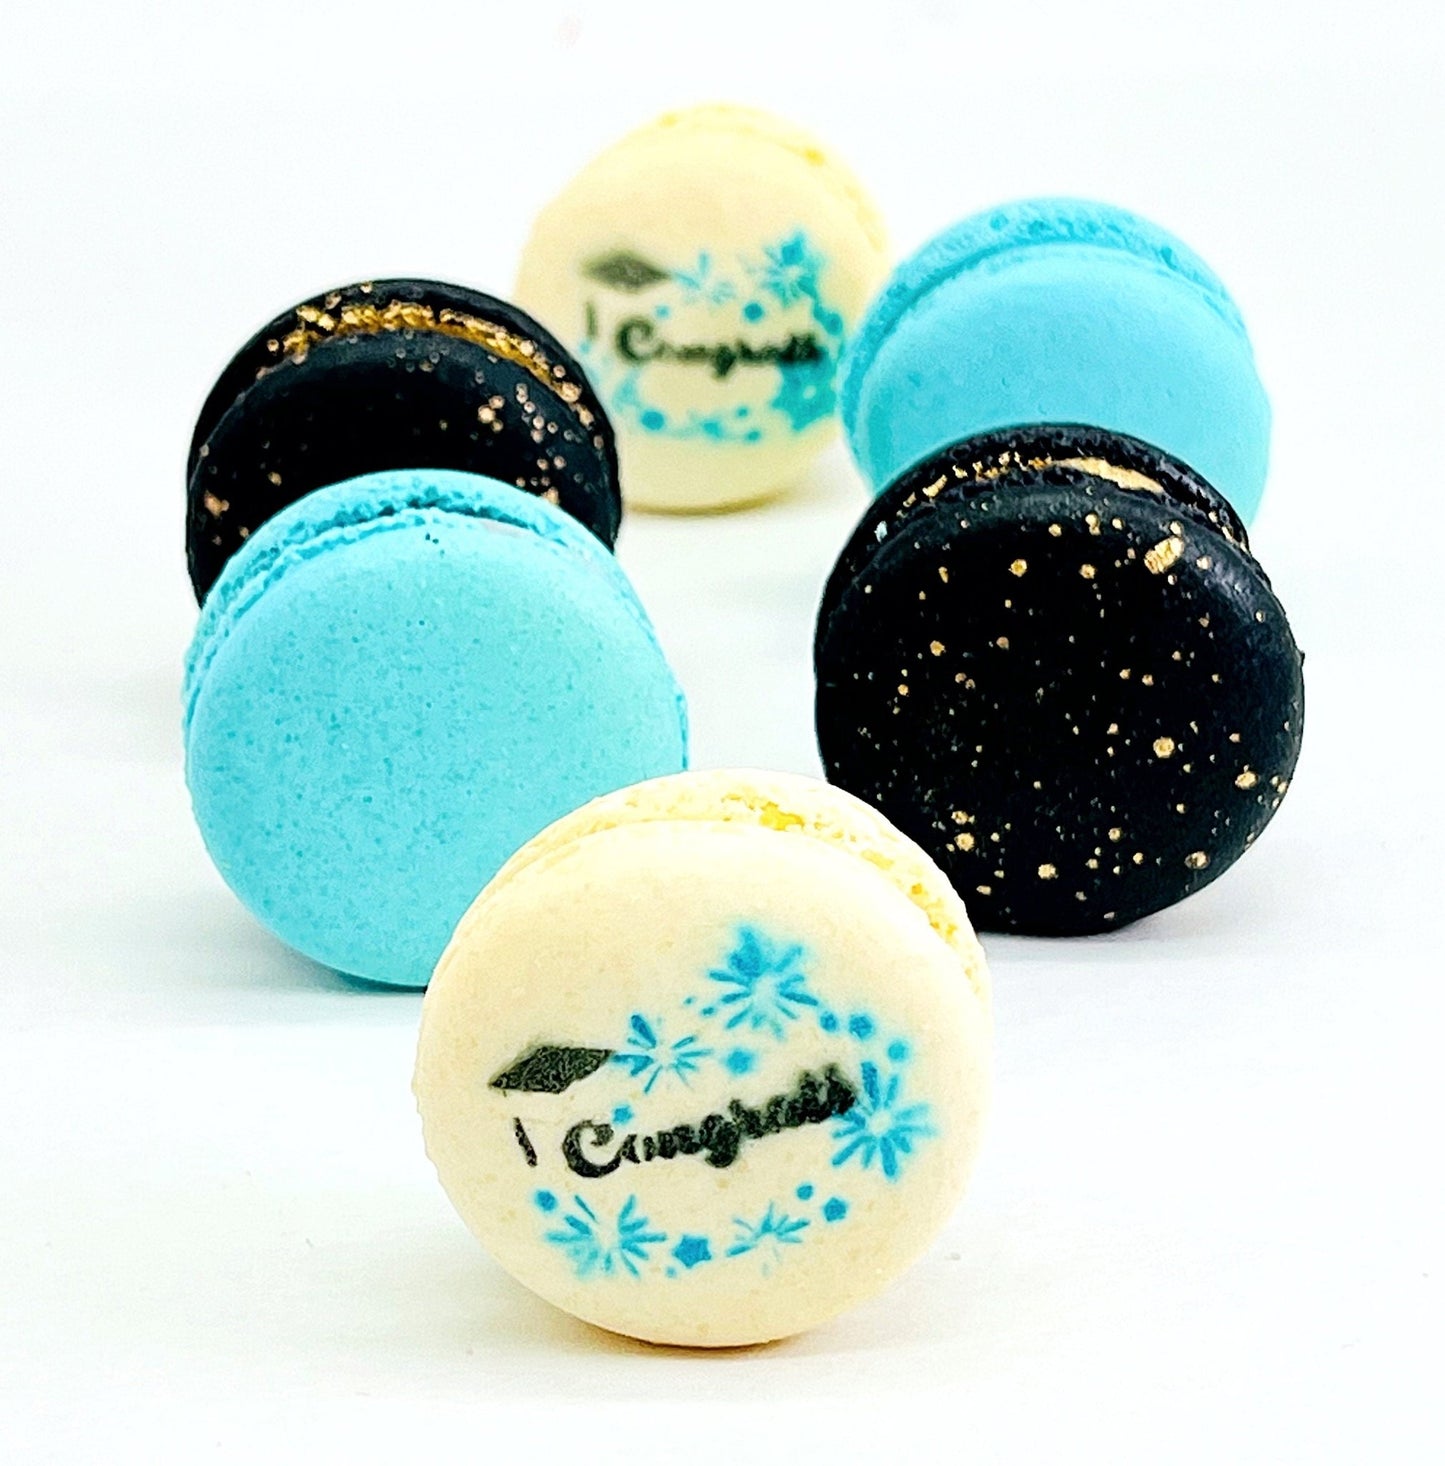 Congrats French Macaron Box (Black / Blue) | Available in 6 & 12 Pack - Macaron CentraleBlackberry6 Pack